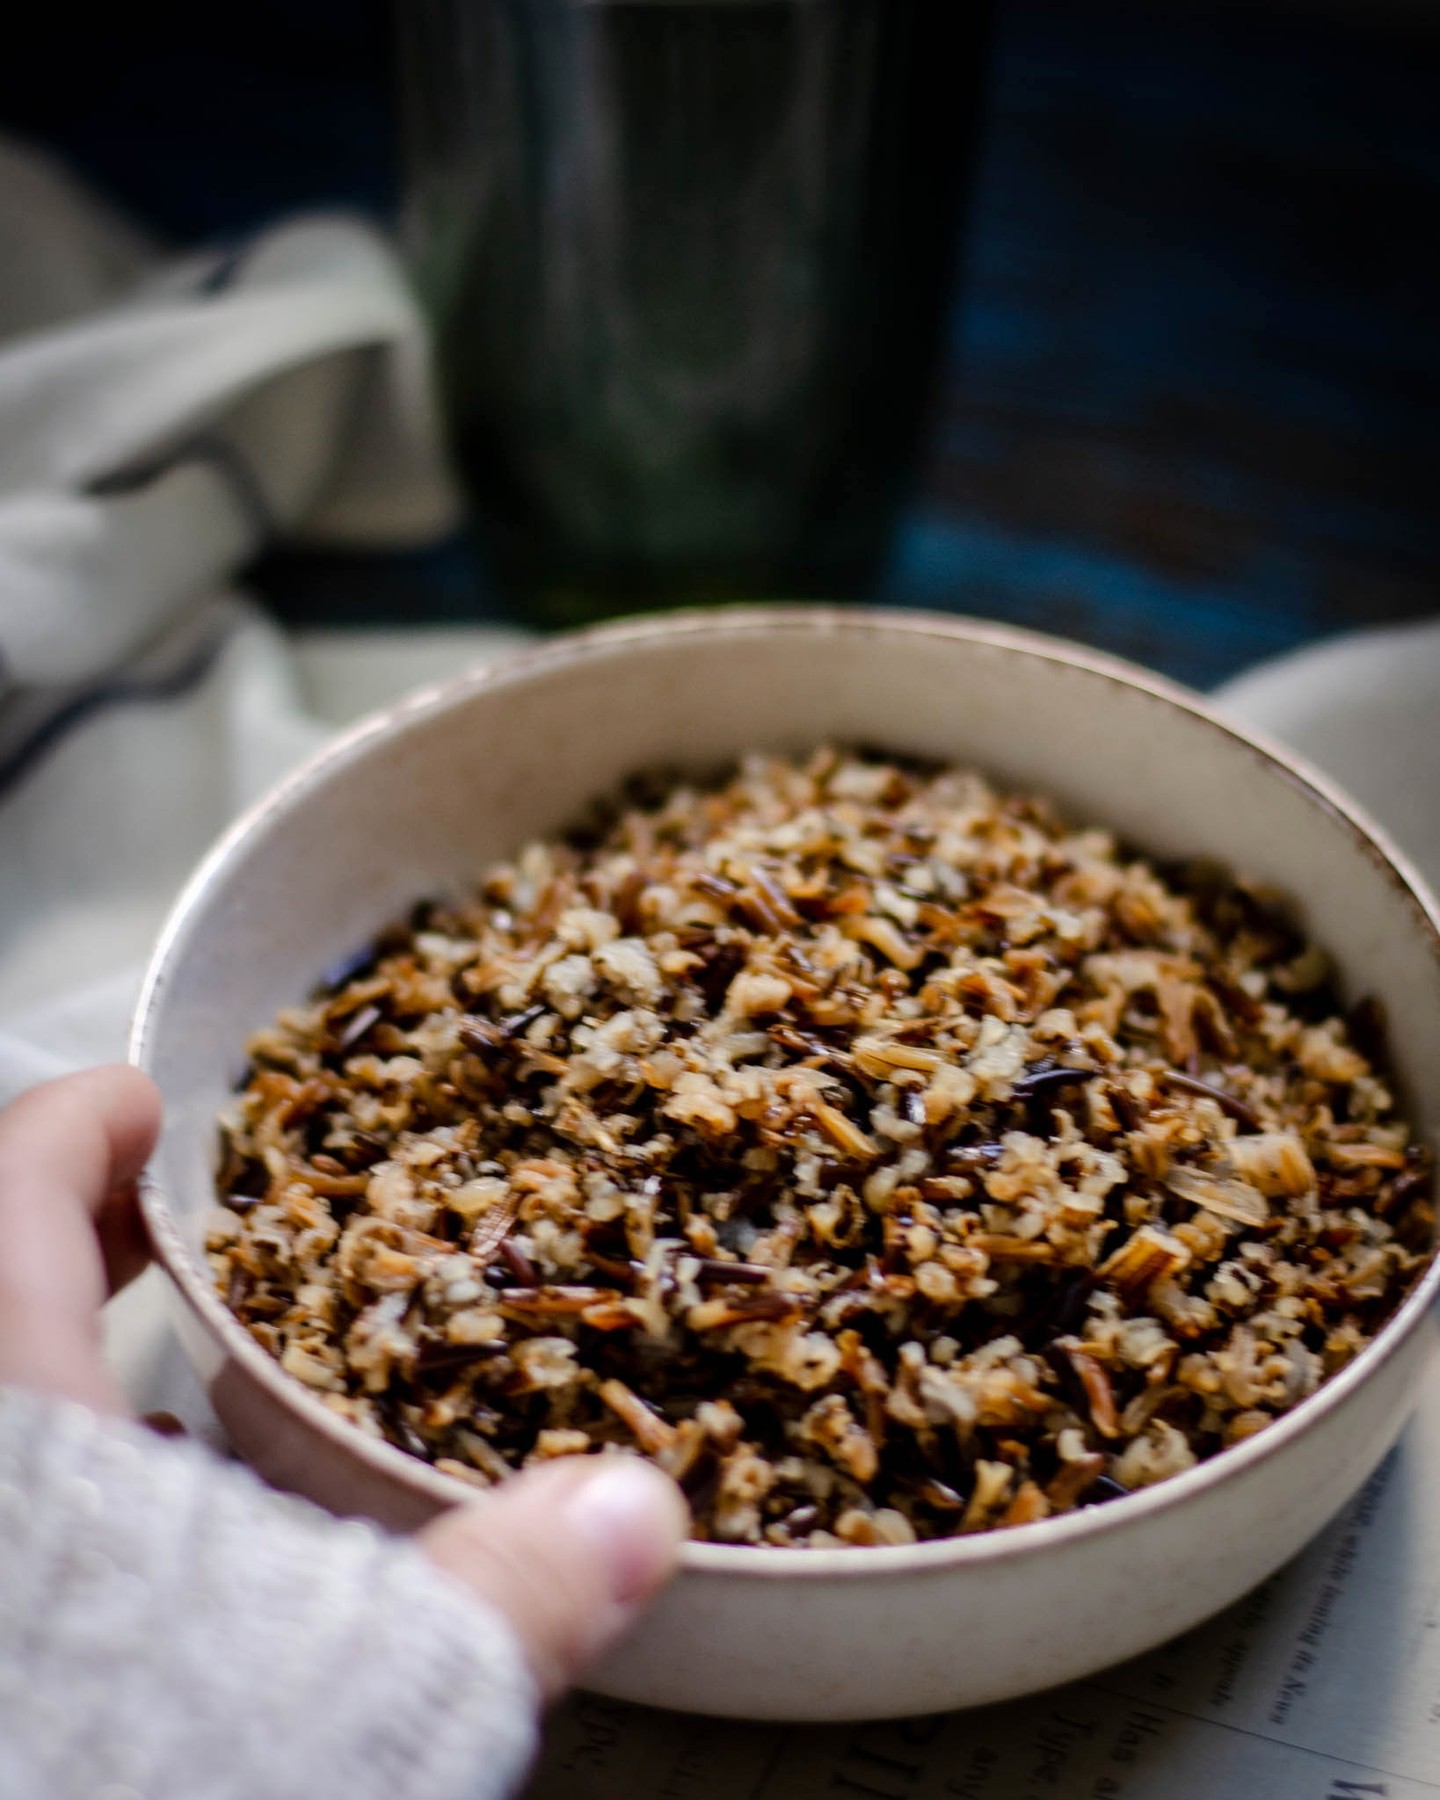 The black wild rice is more earthy in taste but also more intense and holds its consistency beautifully. Great alternative to classic rice.

my entry to:
’get cosy’ challenge by
@createaplatephotography @casadelavida.nl #foodanditsseasons
@studiove_food as judges and @healthygoodiesbylucia @fodory.com @twinsinmykitchen 

 “Shades of fall in food photography” hosted by @bewellrecipe judged by @my_romantic_kitchen_stories and sponsored by @poppybeesurfaces.

" Seize the day" #mymoodymonday @slow.food.studio @mine.table @lucrequesada

"Open Theme" #foodphotobiteswithritu @happytummybyritumbhara
@foodphotobiteswithritu @vegansugarspoon @blablafoodz_prop_store

@hautescuisines @foodthe8thart @foodartclick_ @fotograficamentefoodstyle @food52 @9vaga_food9 @creativelysquared @foodelia @still_life_gallery_ @foodartproject @foodphotoaward @foodfluffer

#vegan #rice #wildrice #vegetarian #tomatoharvest #autumnvibes🍁 #still_life_mood #changingseasons #foodartblog #still_life_gallery #seasonalsimplicity #onvtable #aseasonaĺshift #f52grams #chasinglight #moodygrams #foodartblog #foodblogfeed #food52 #feedfeed #foodstyling #hygge #foodblogfeed #tastingtable #momentslikethese #tastemade #food52grams #yourstomake